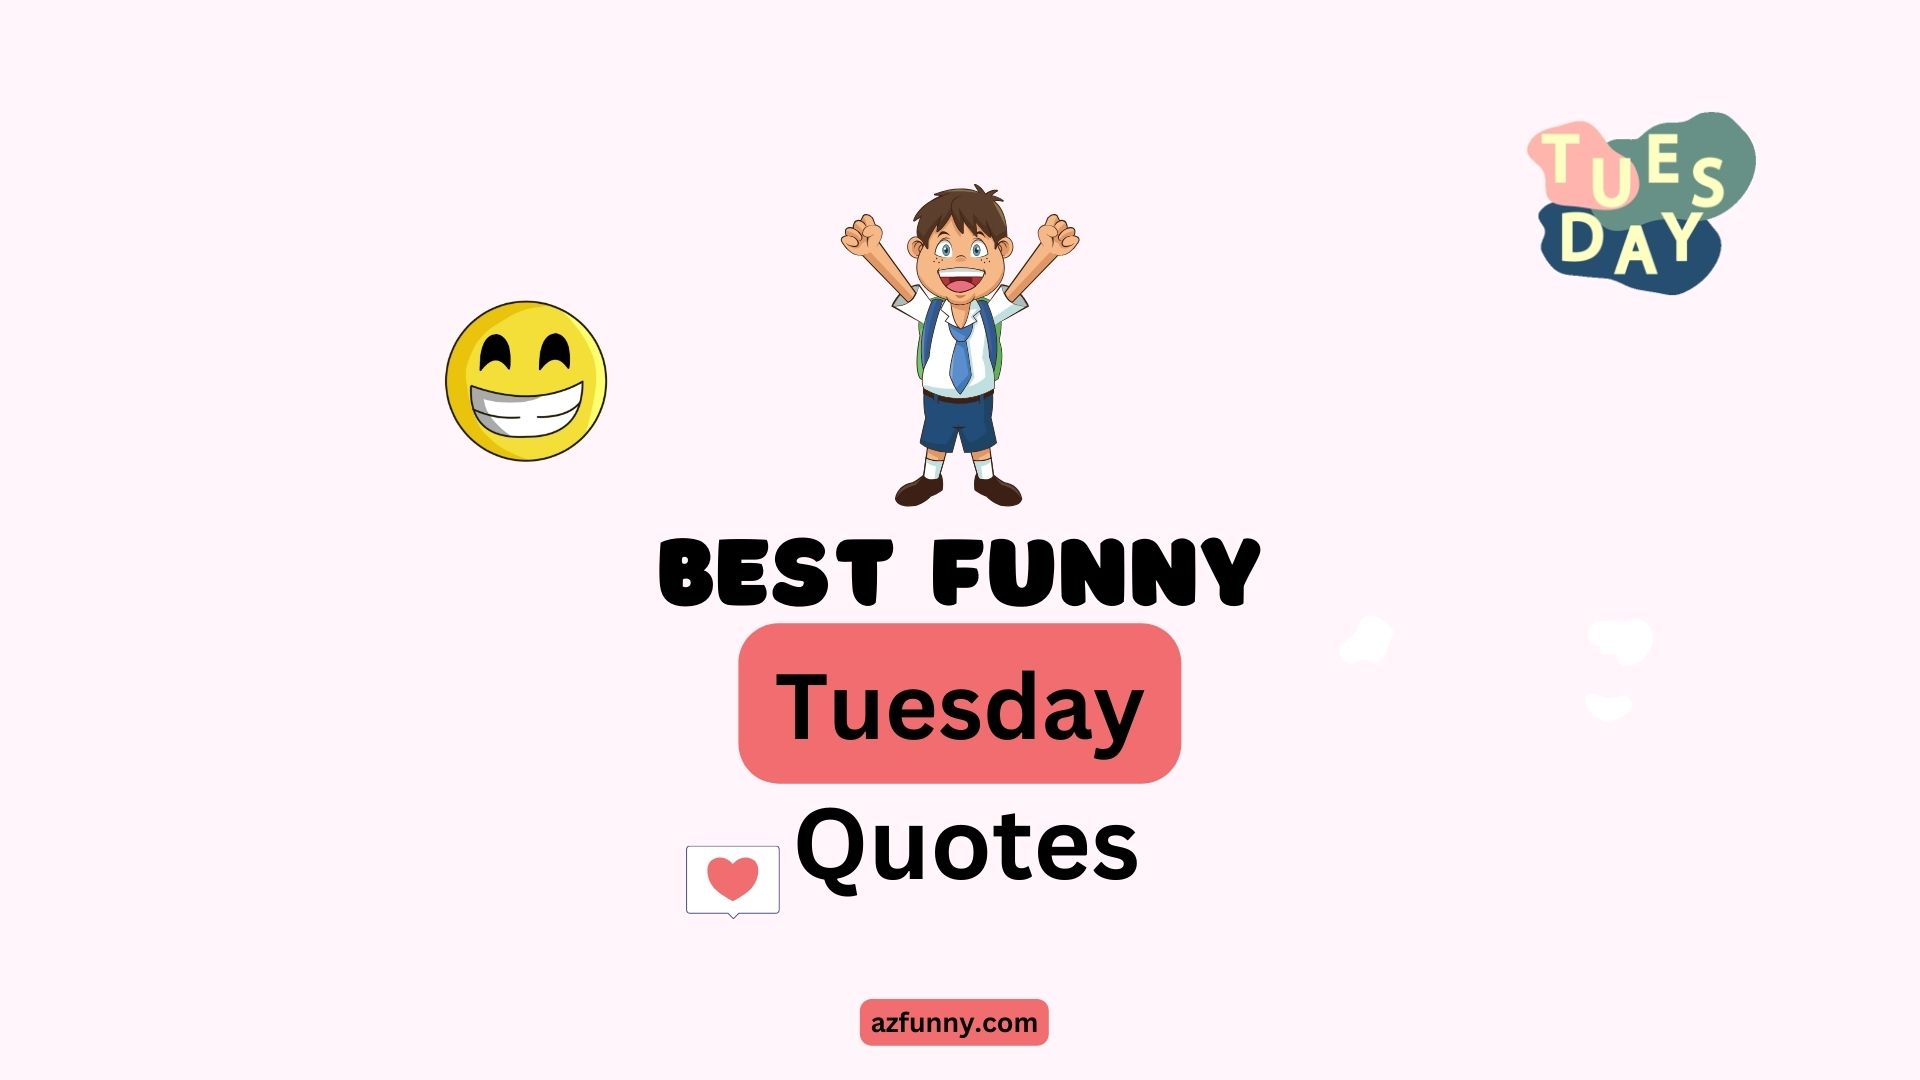 The Best Funny Tuesday Quotes for 2023